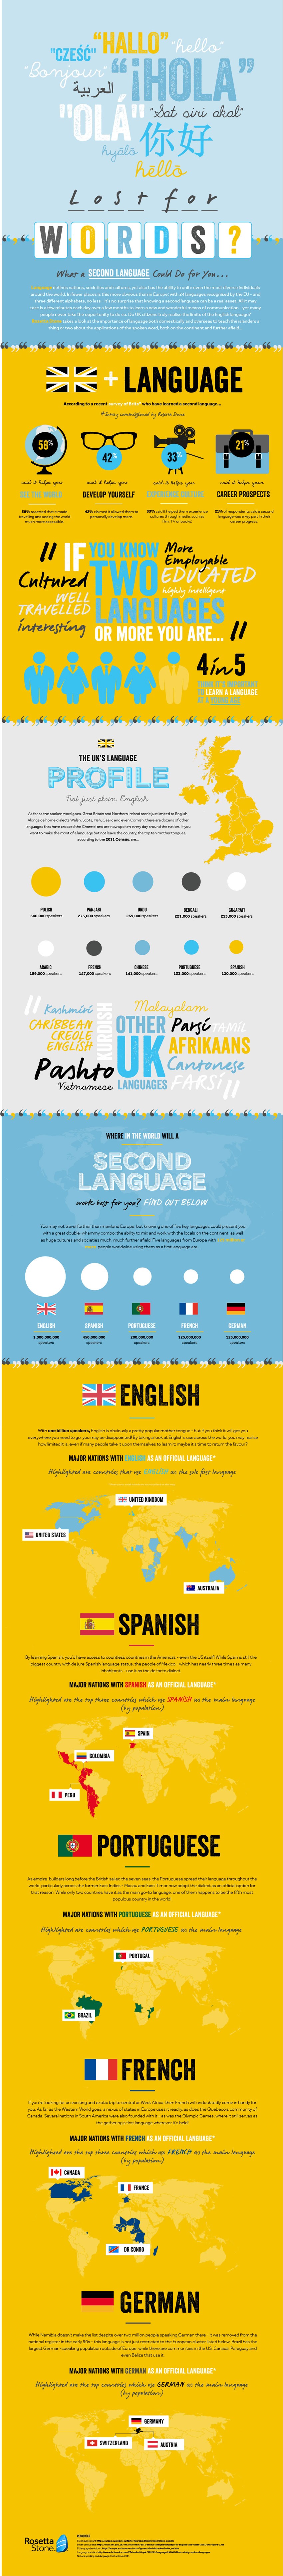 What a Second Language can do for you?